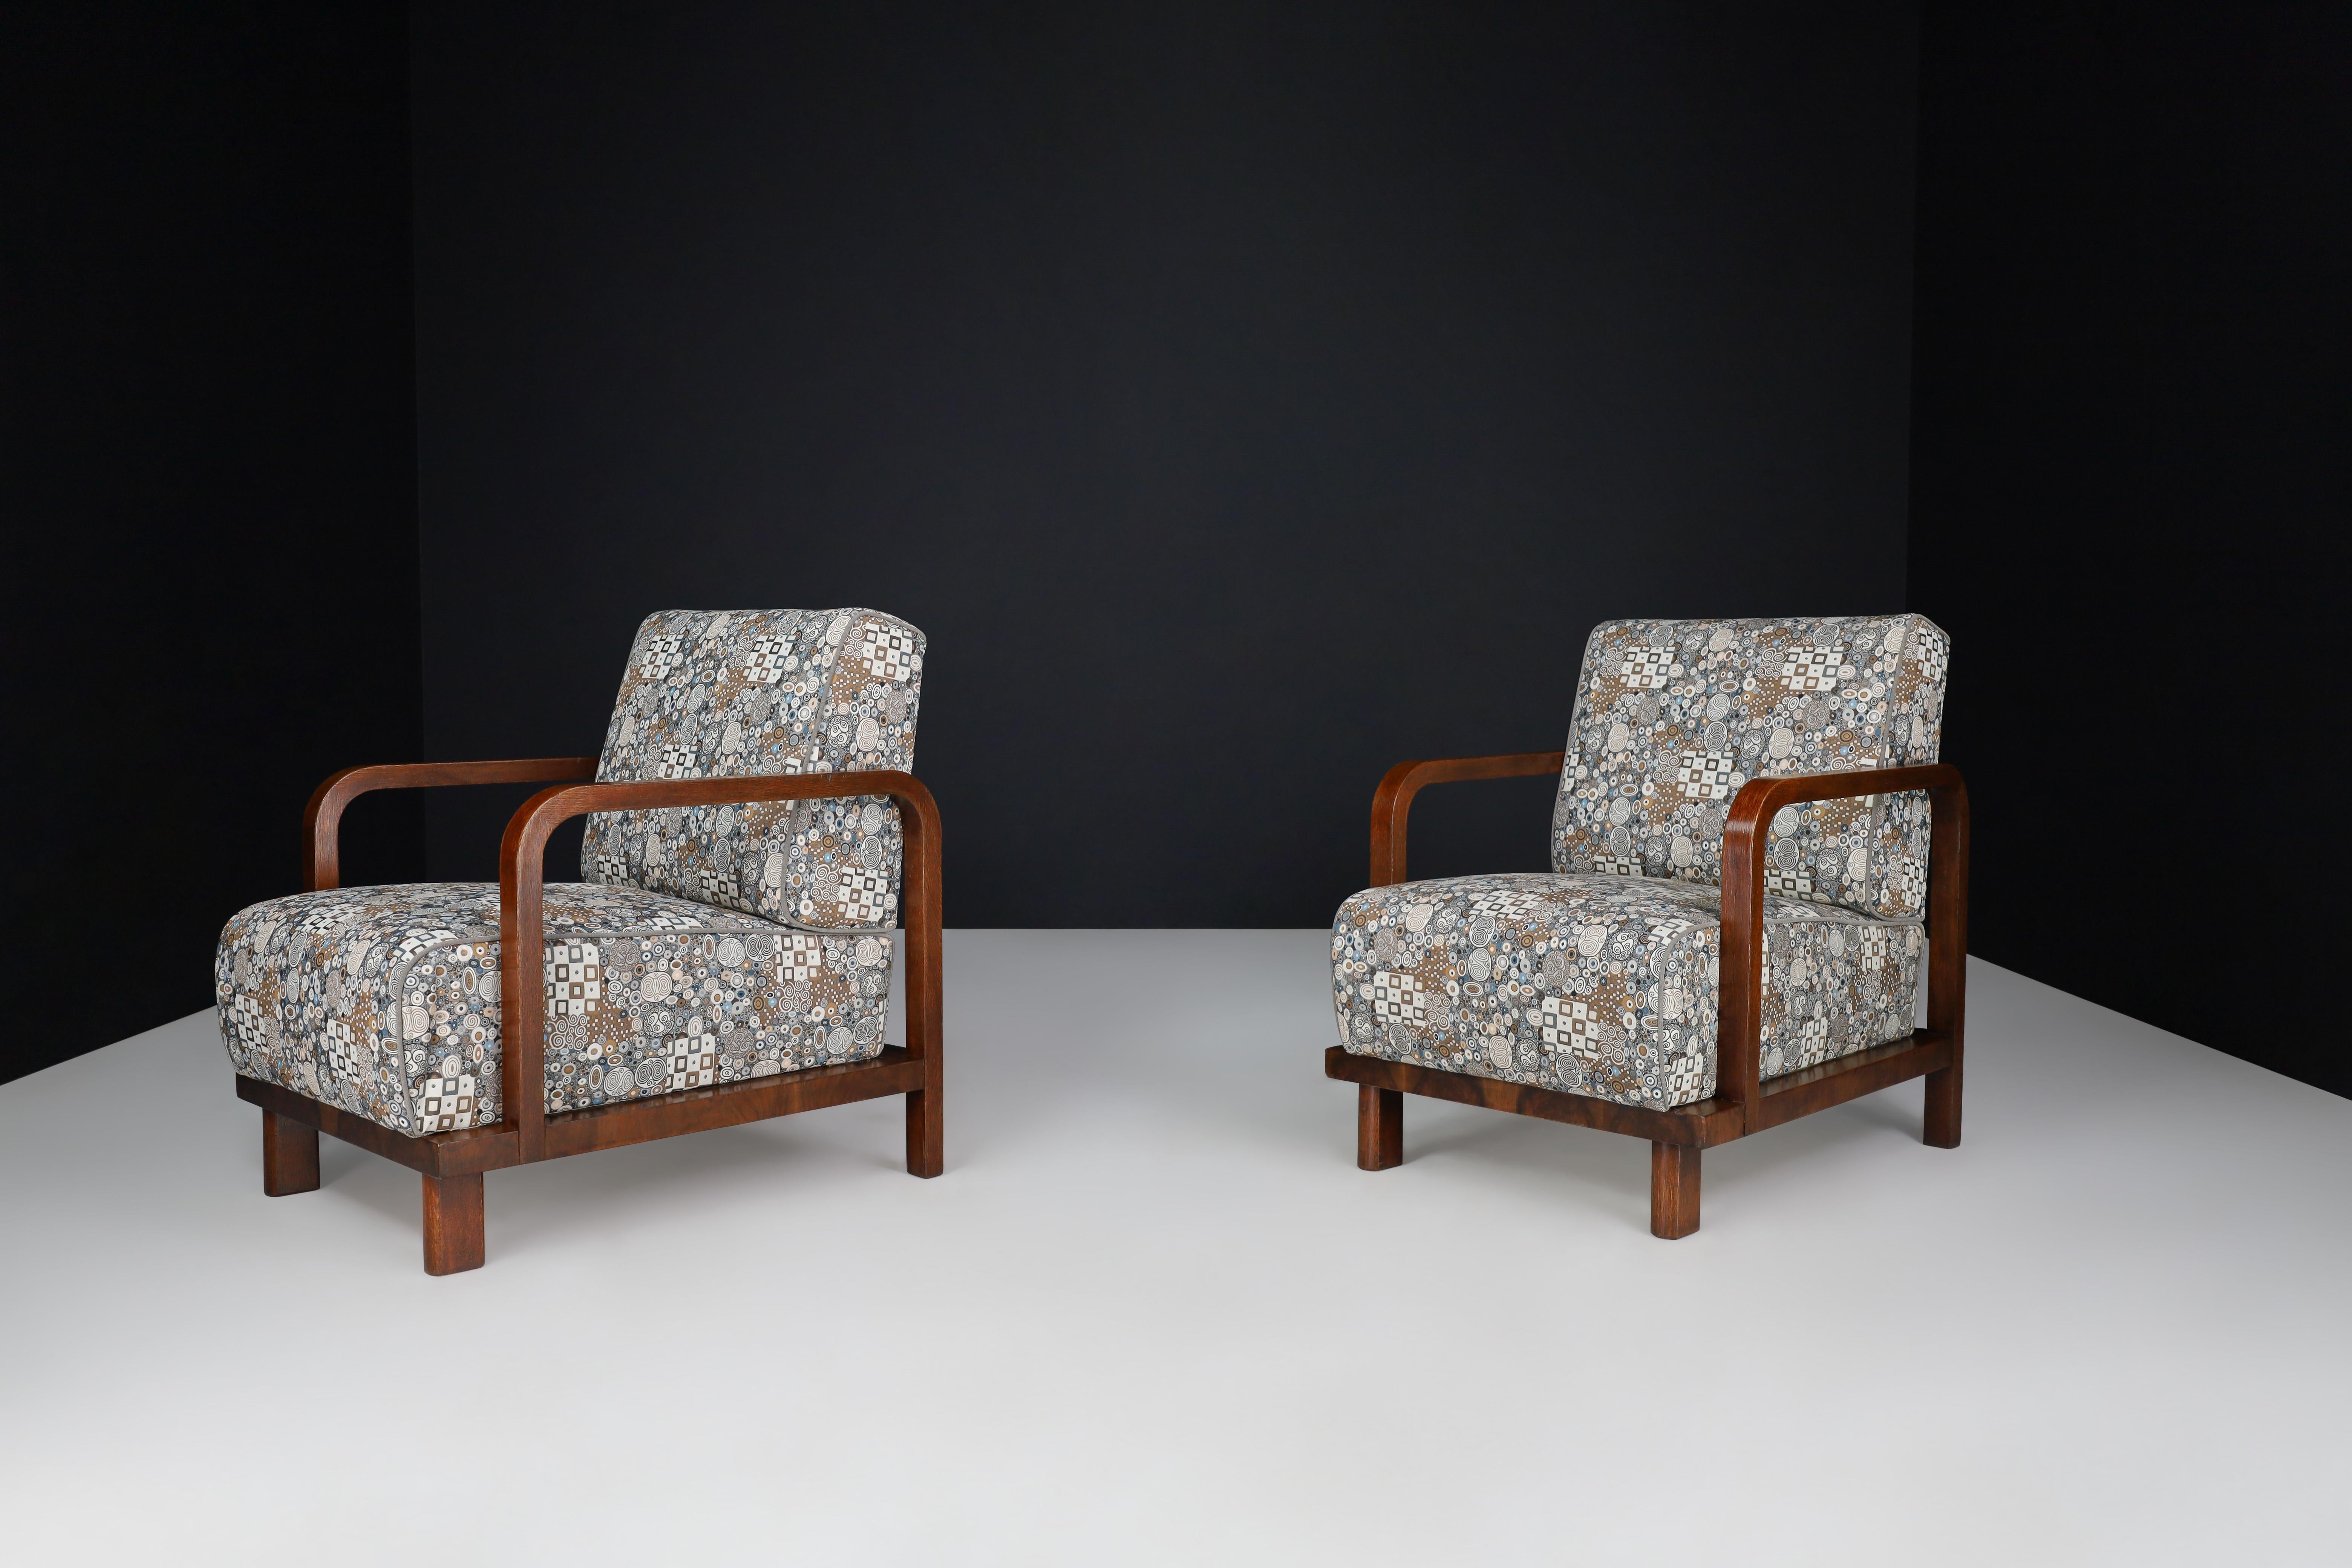 Pair of Two Art Deco Lounge Chairs Re-upholstered  Art Deco Fabric, France 1930s For Sale 1